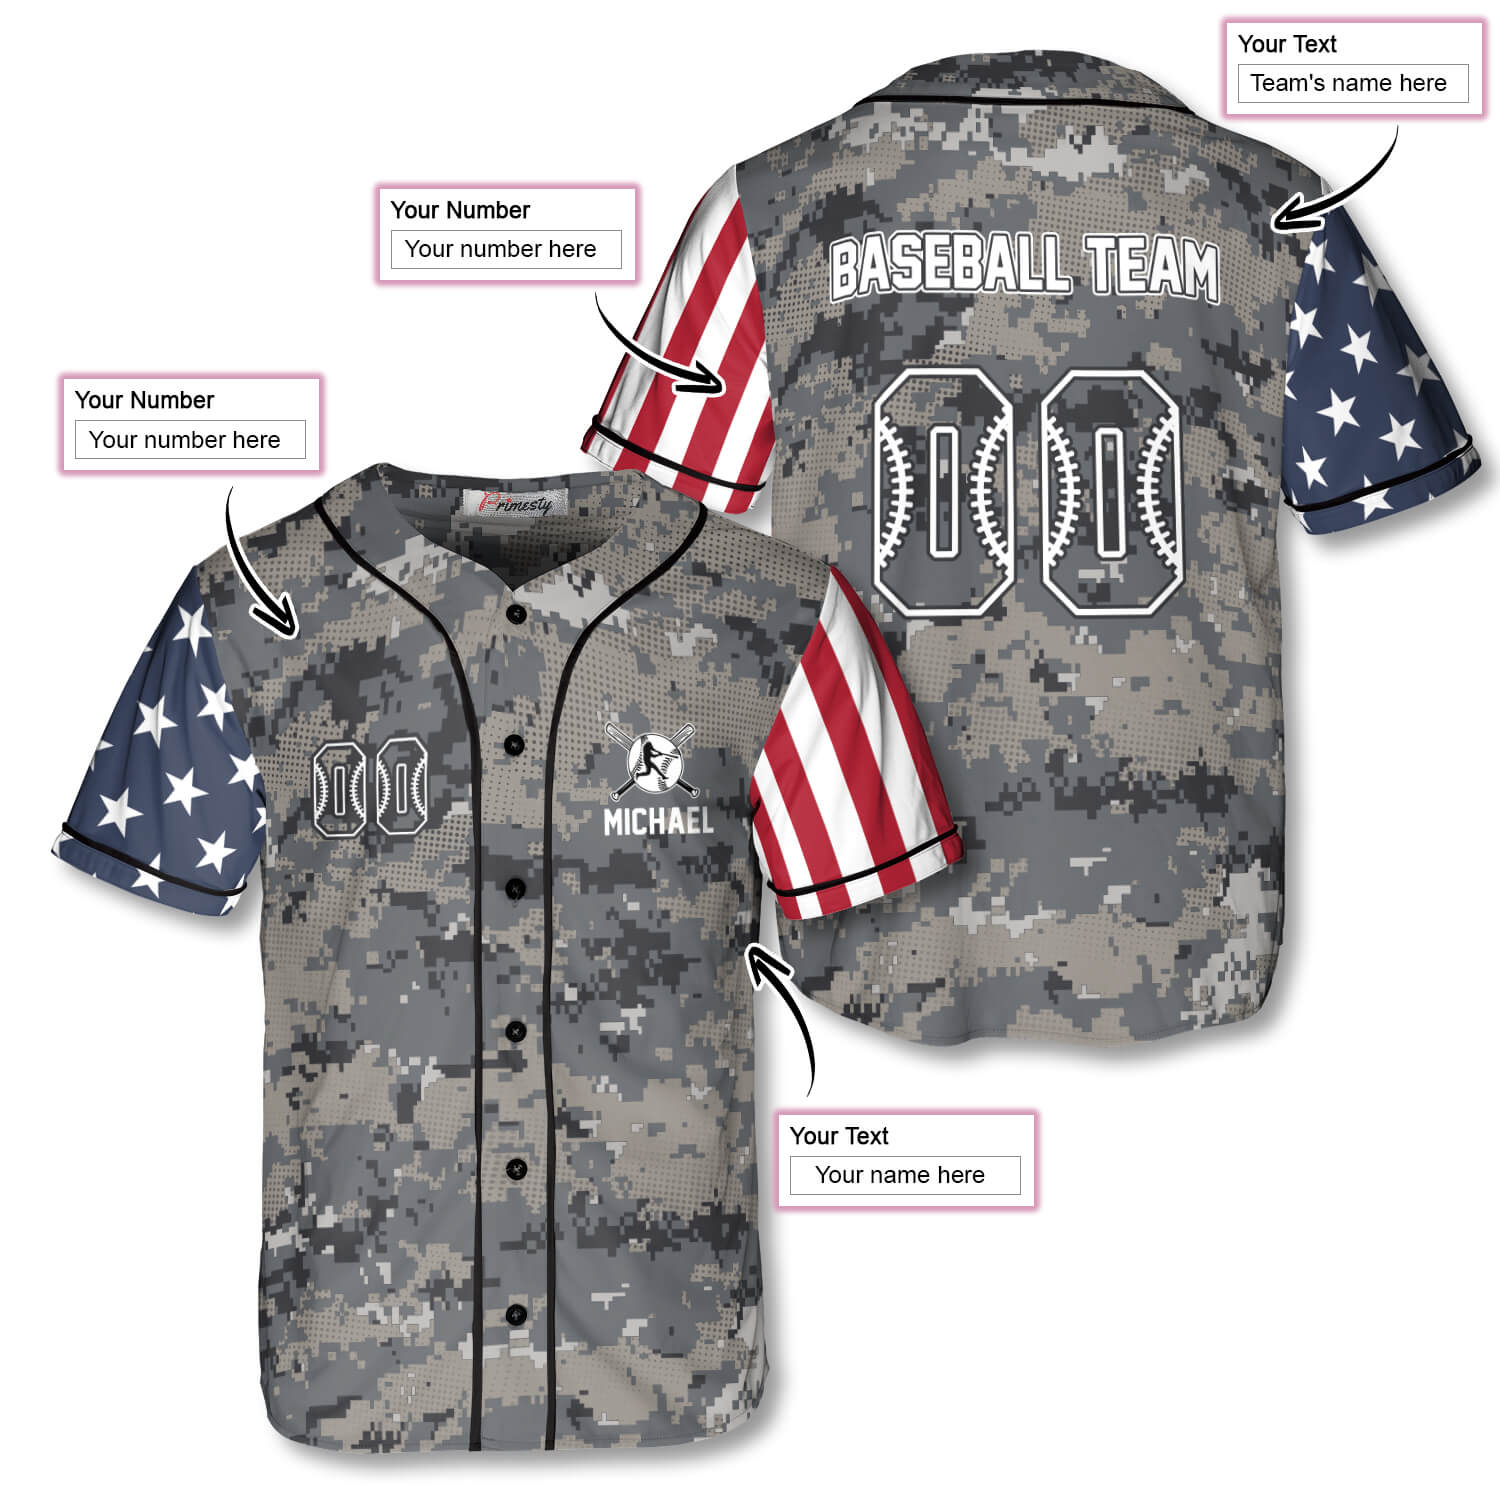 Sports Uniforms Stuff: Camouflage Baseball Uniforms: Support Our Troops!